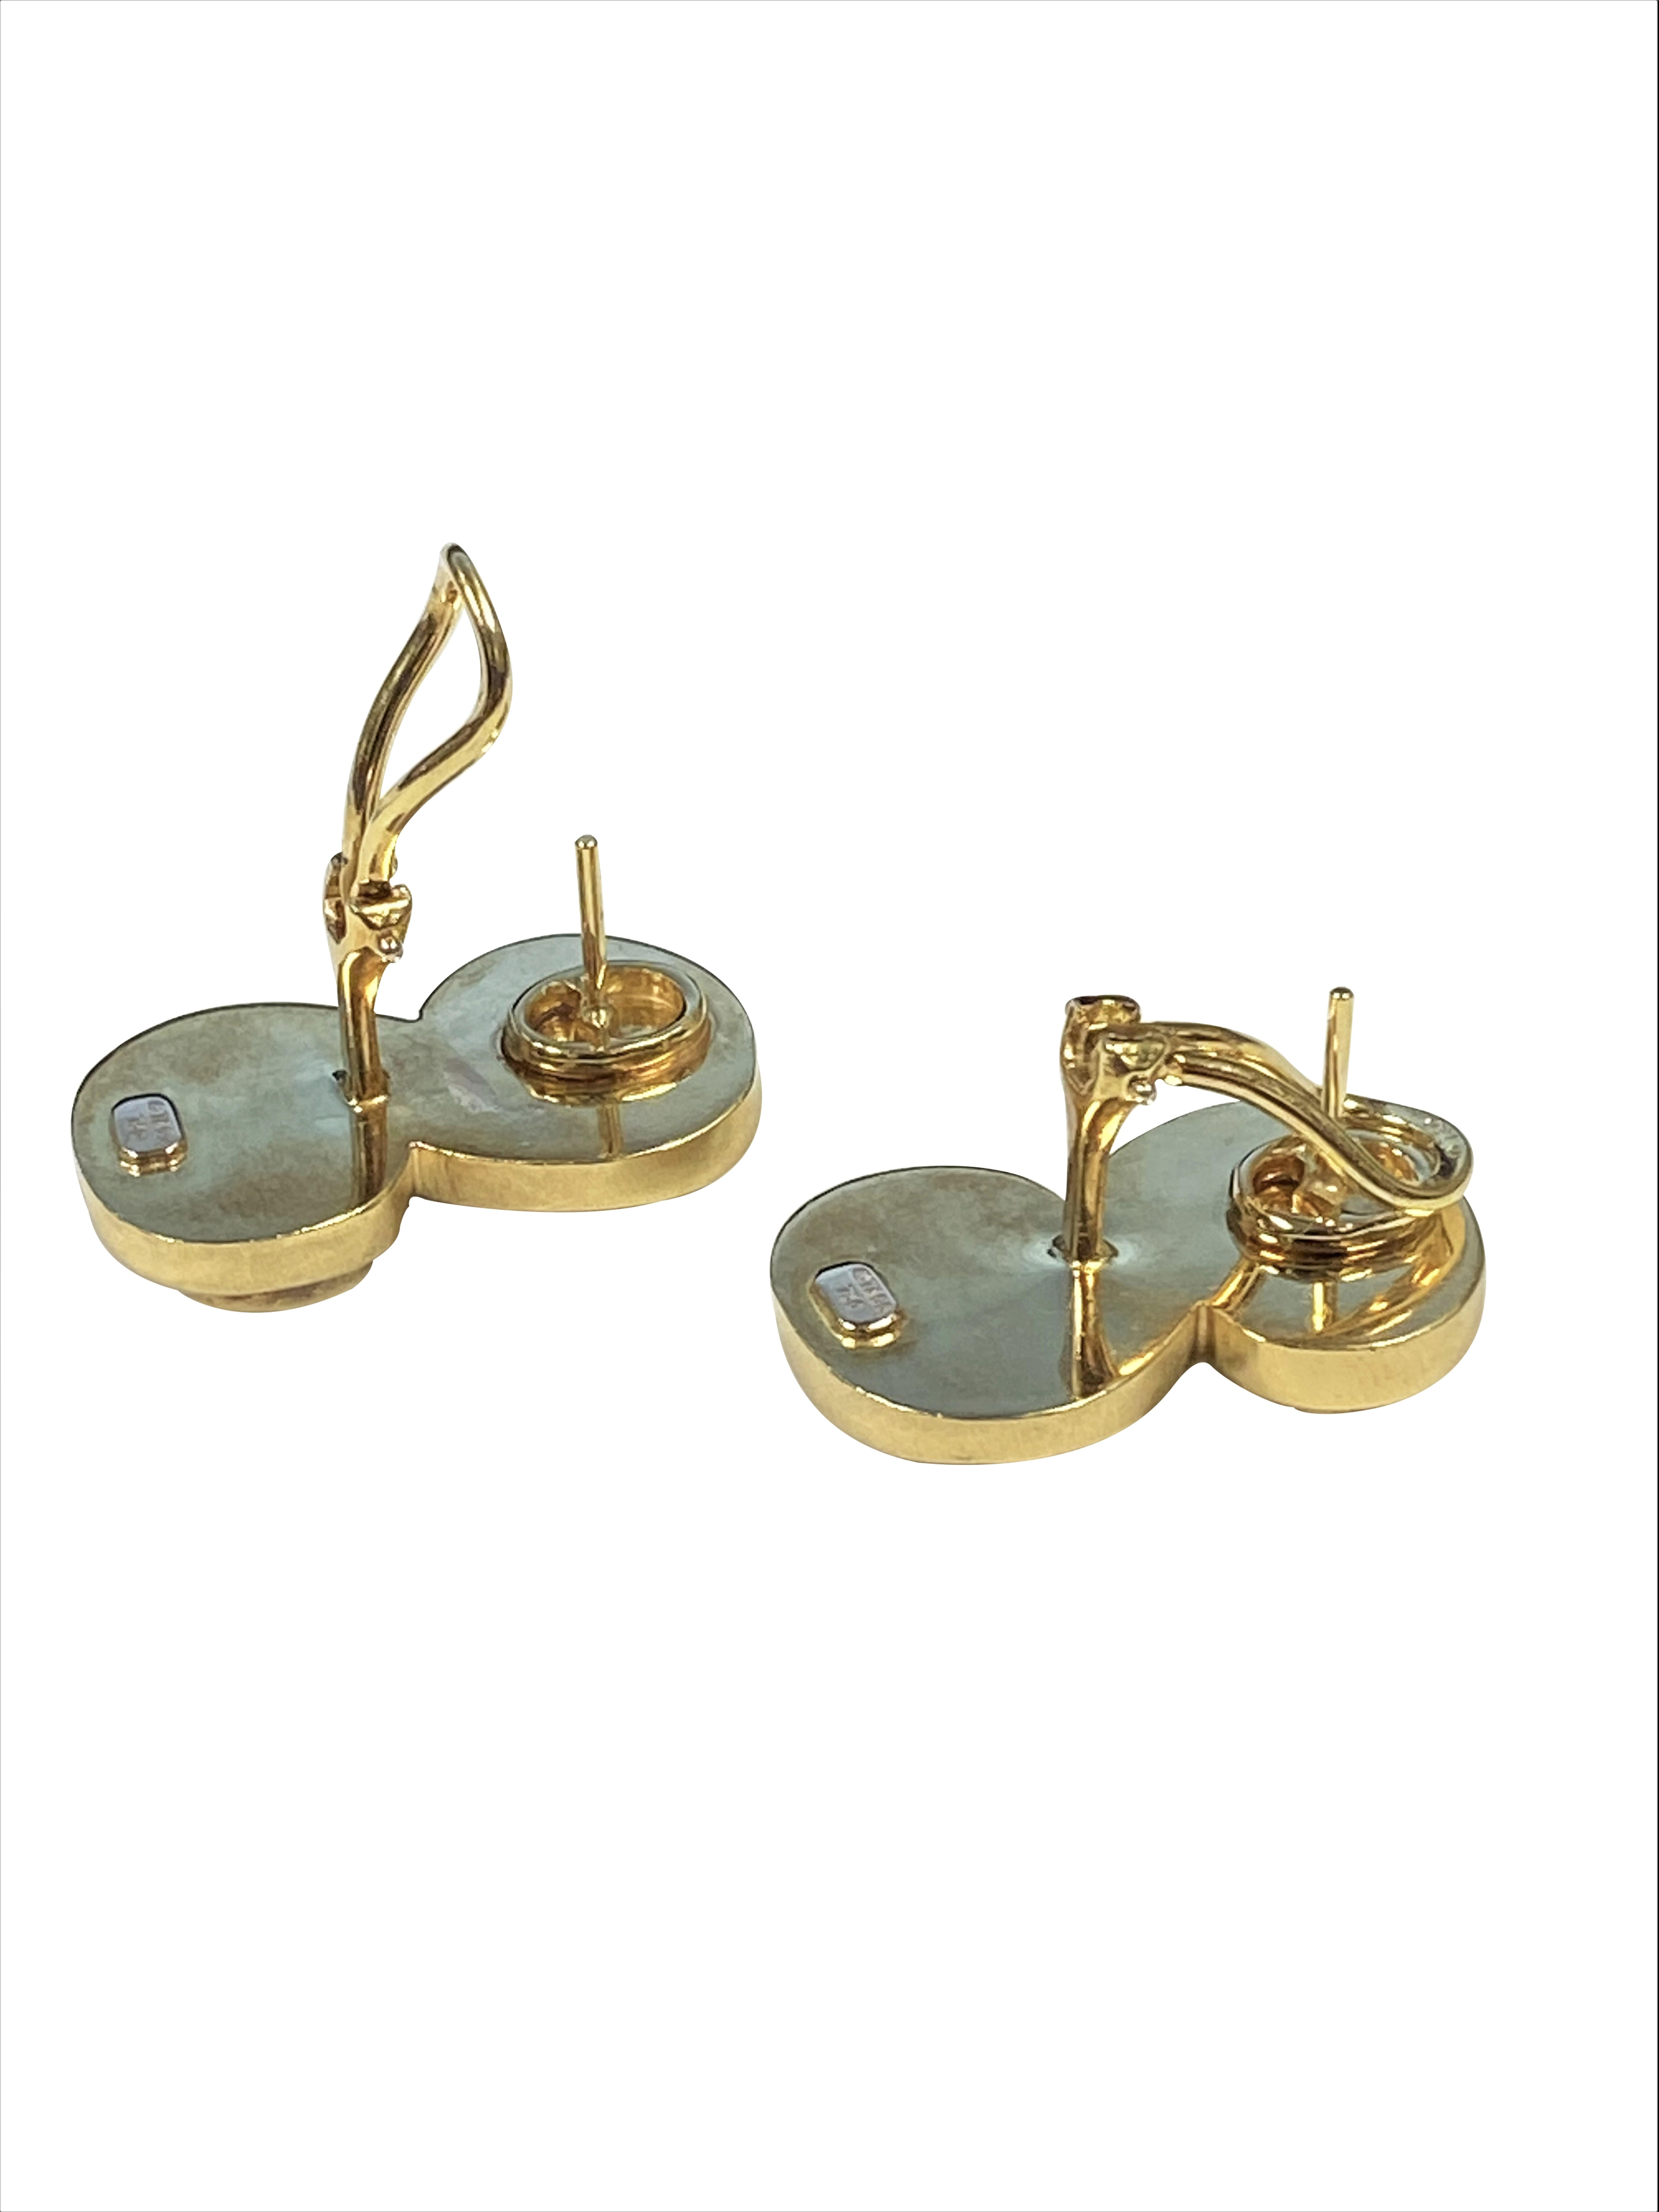 Circa 1990s Tiffany & Company Spiro Swirl collection earrings, the deep grooved S form Earrings measure 1 inch in length, 5/8 inch wide and weigh 20.5 Grams. Omega clip backs with a post. 